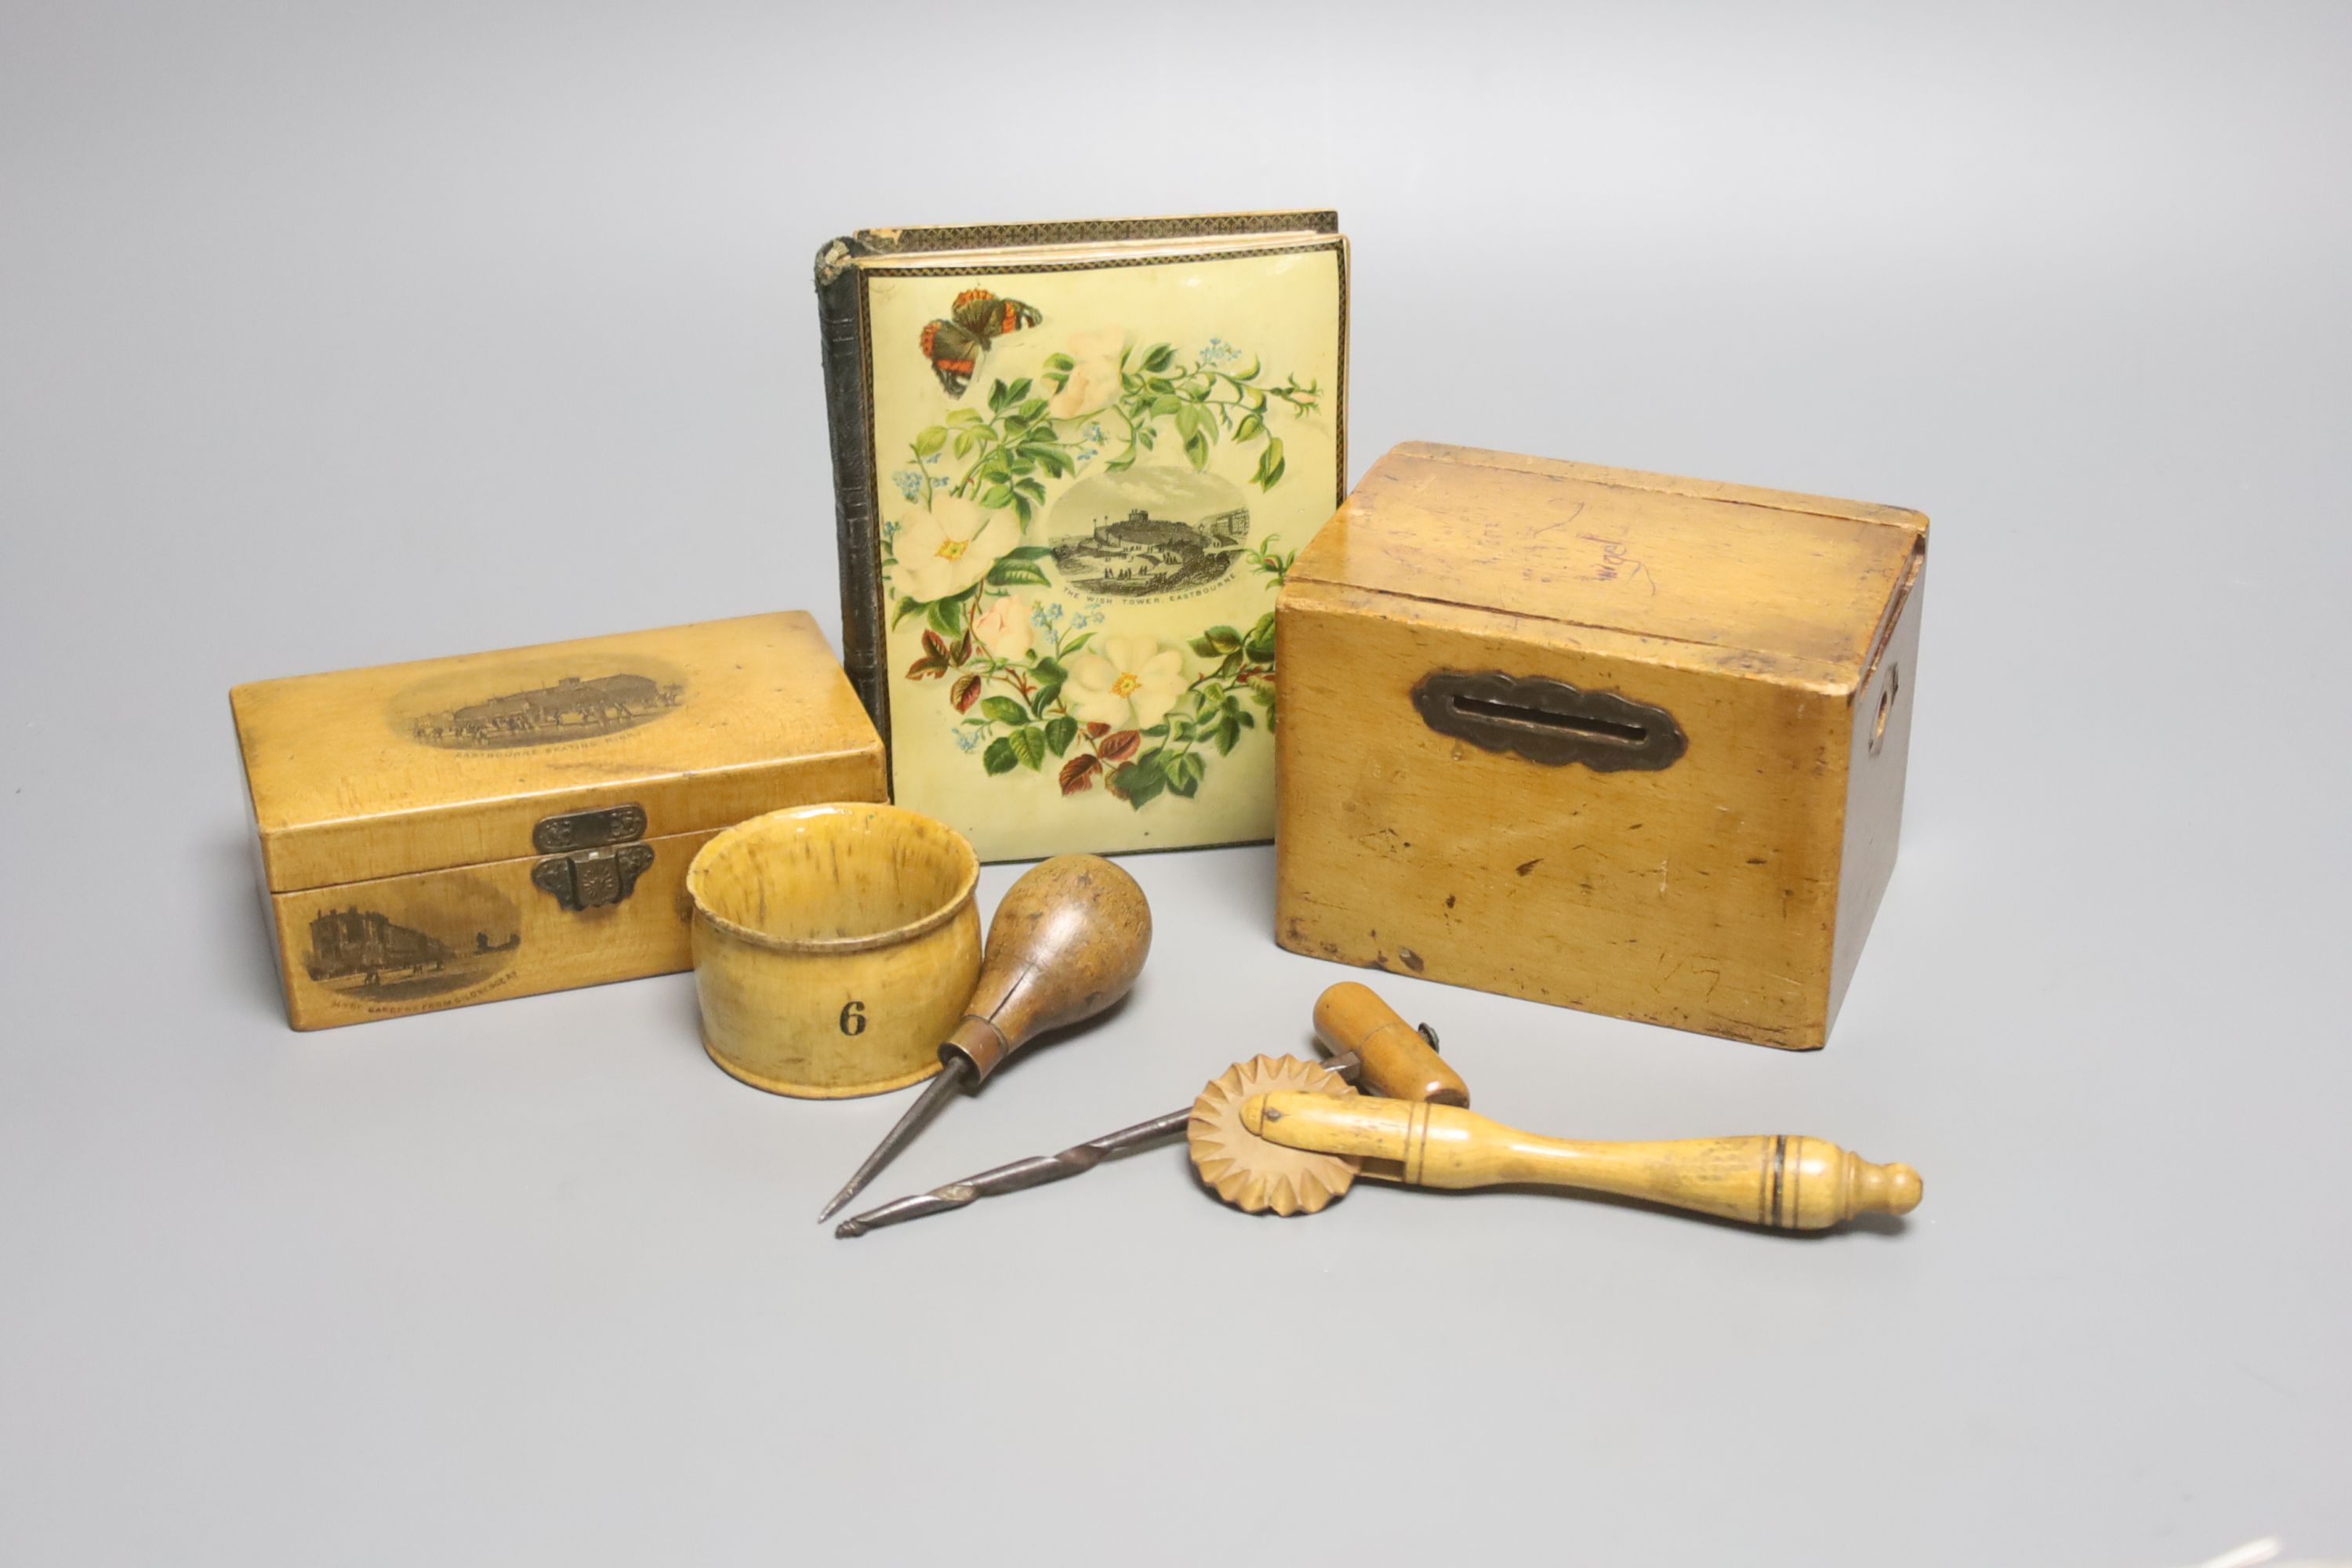 A Victorian Mauchline ware album and box, Eastbourne Wish Tower and skating rink, and 4 other items